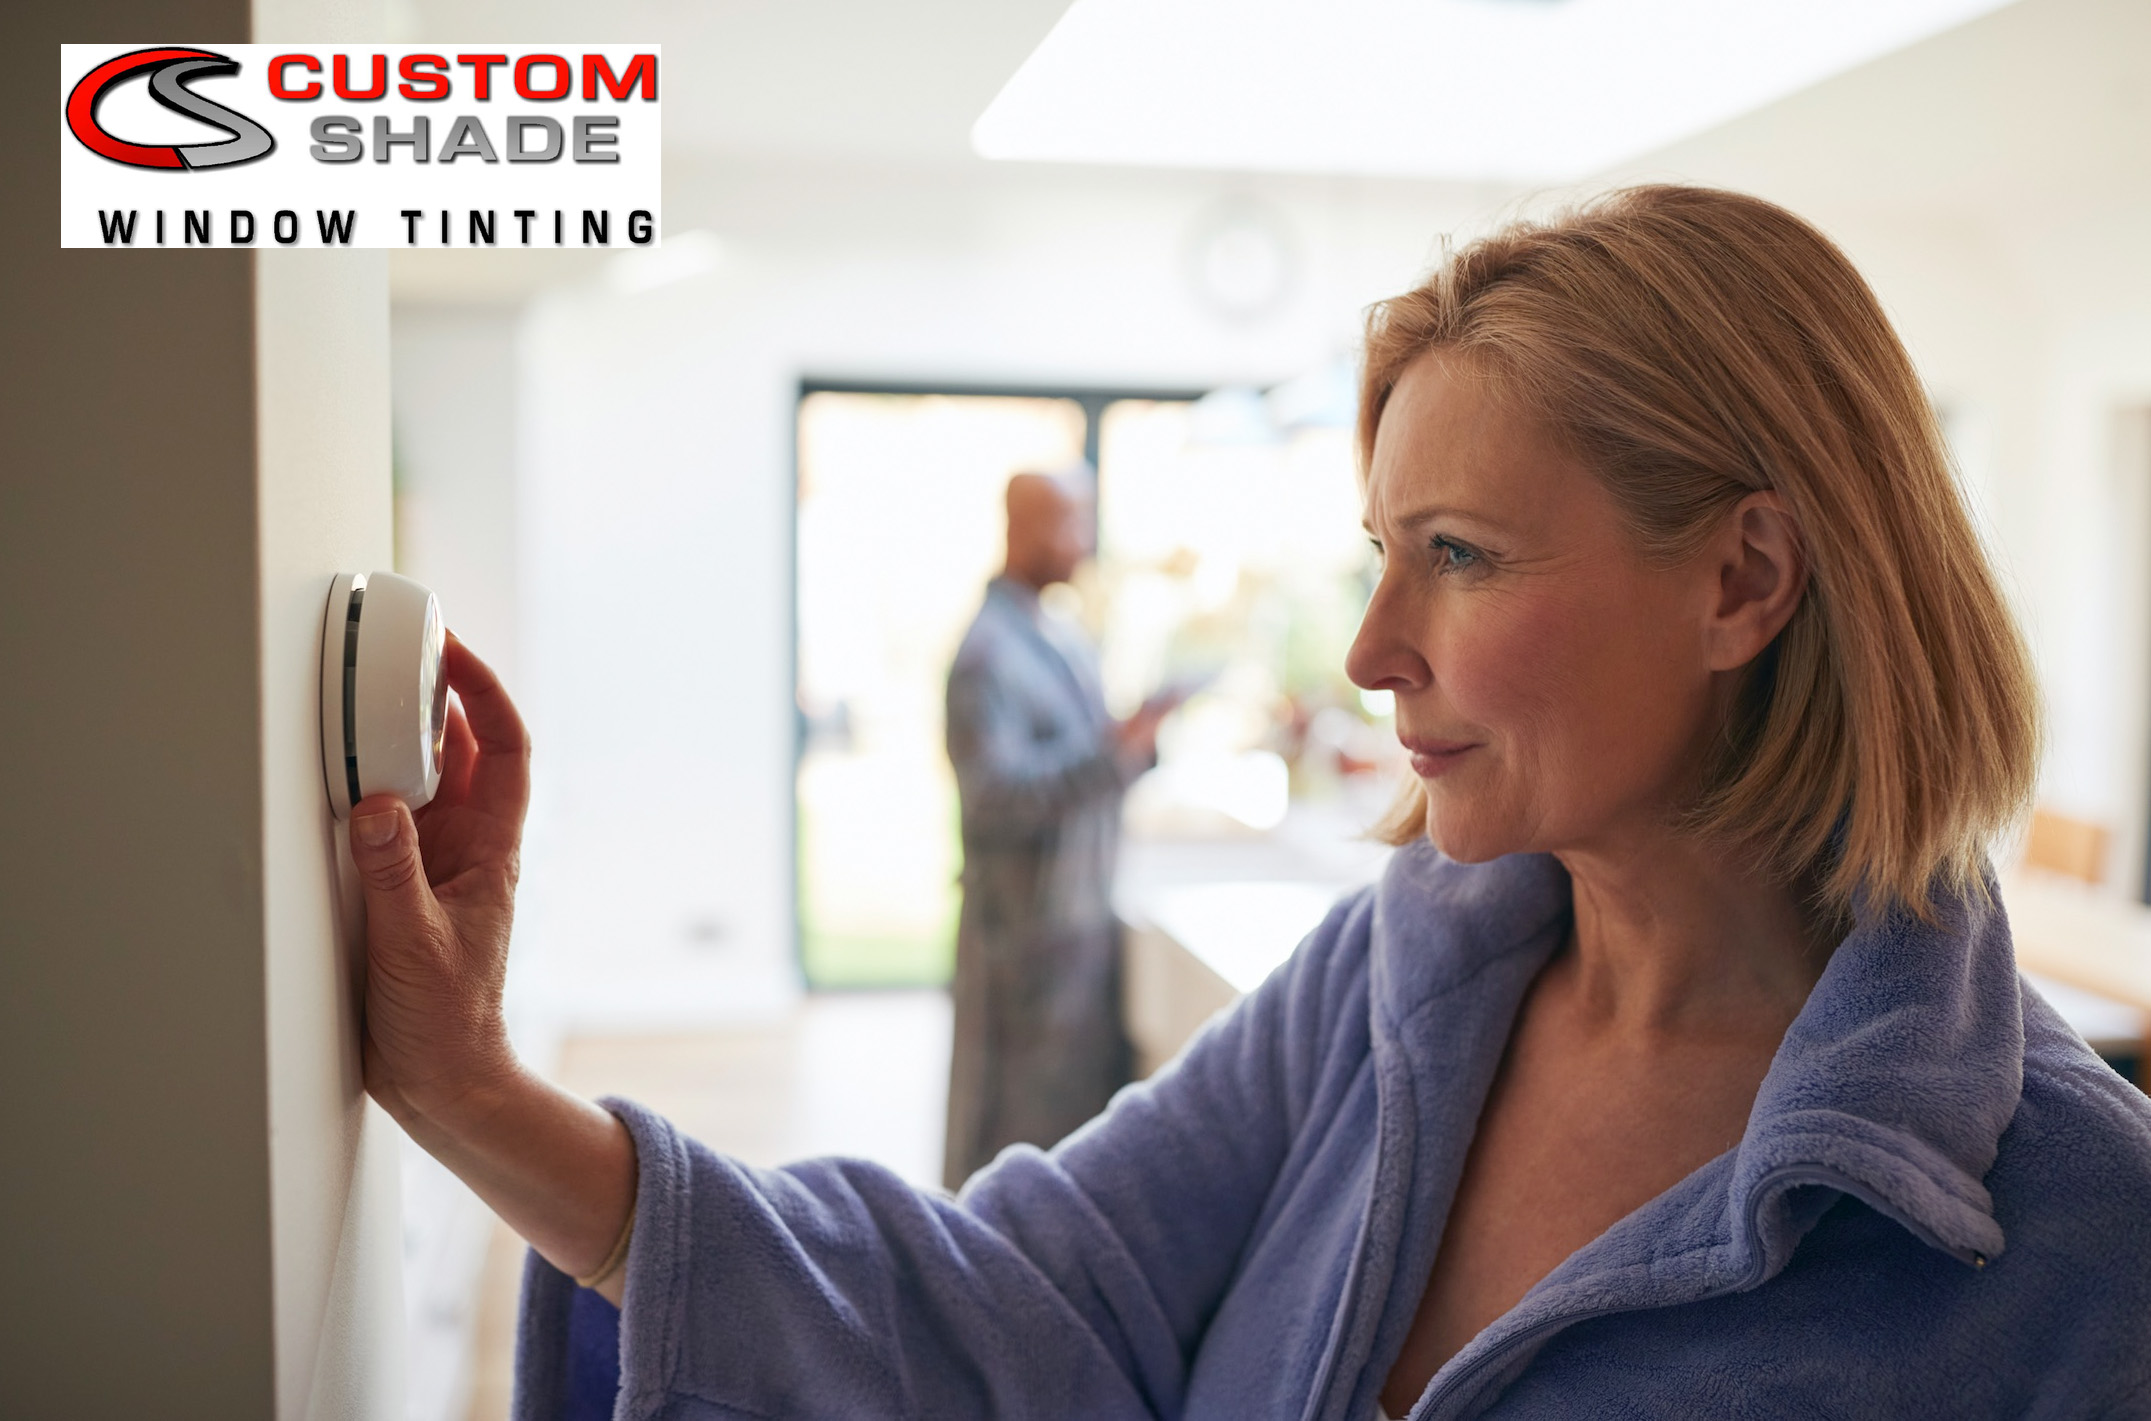 Reduce Home Energy Usage With These 4 Easy Tips - Home Window Tinting in Springfield, MO